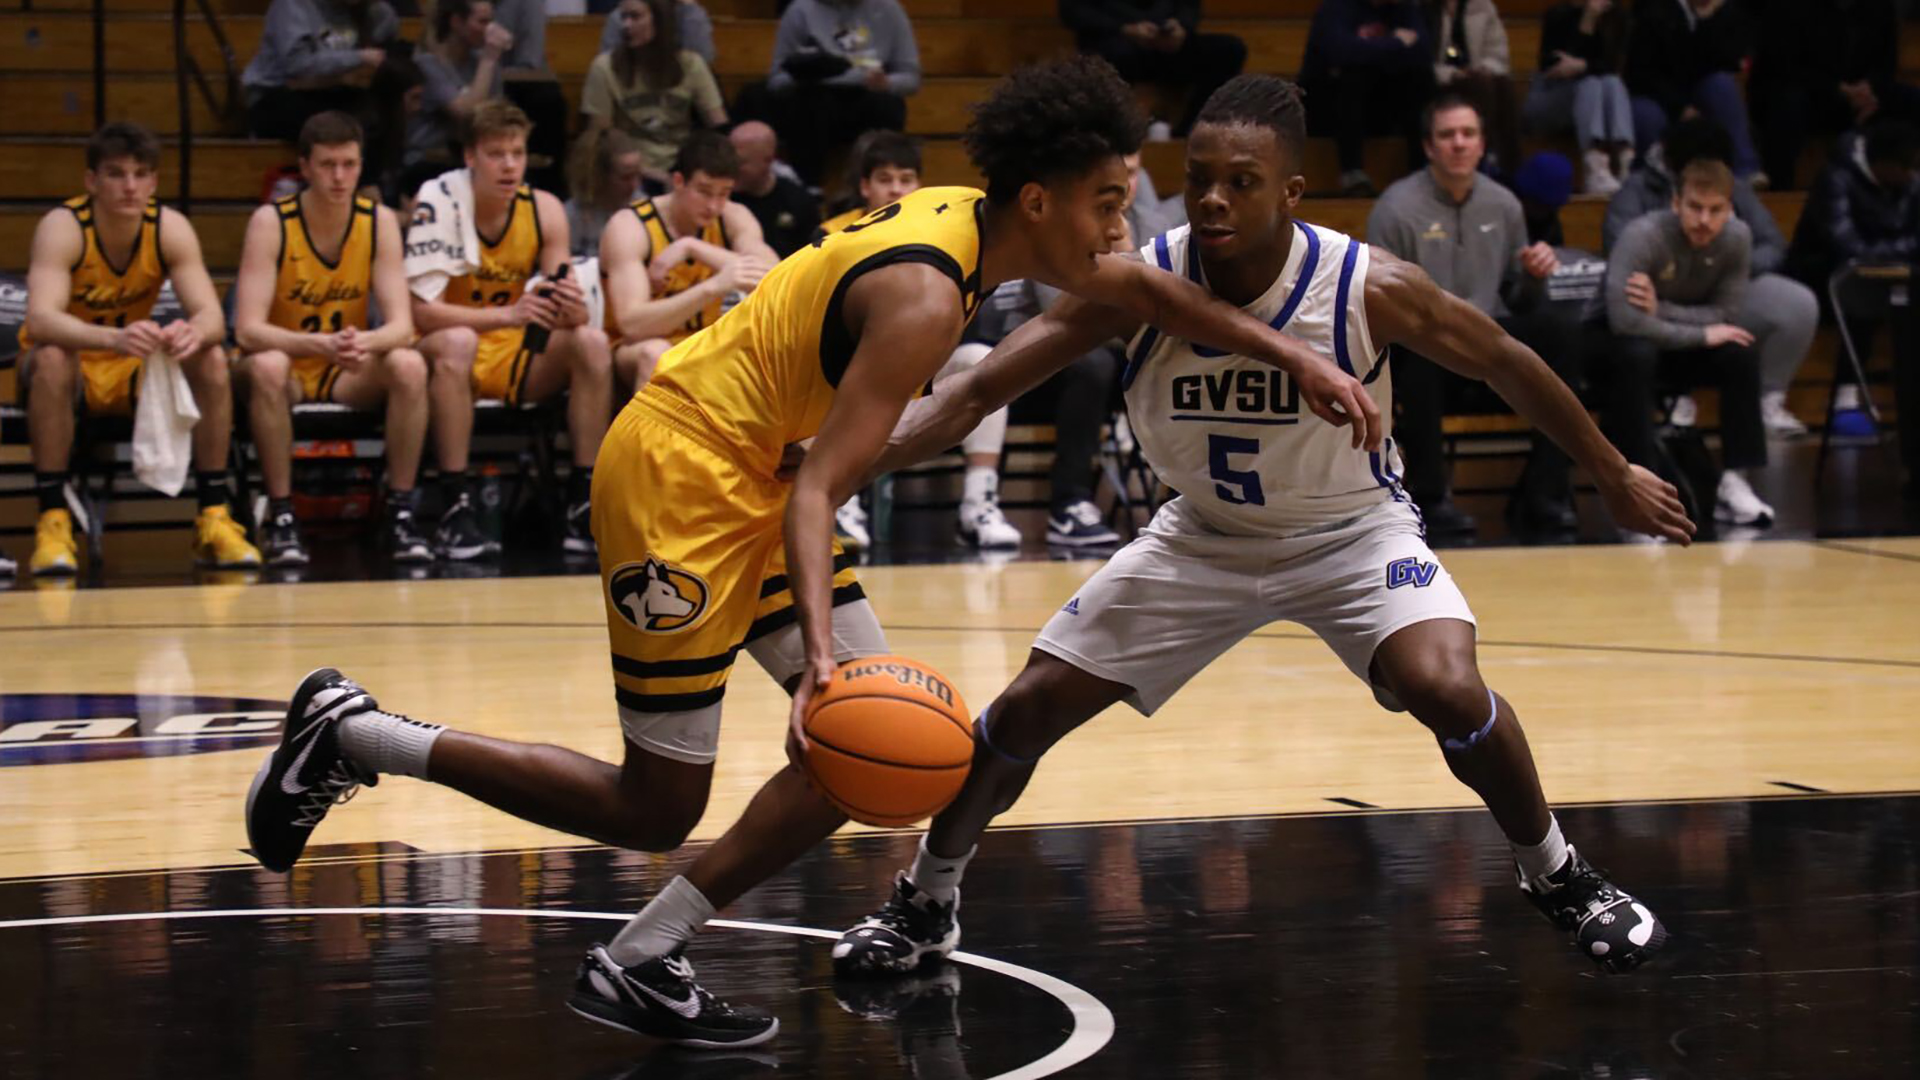 PREVIEW: Huskies contend with Lakers in GLIAC Semifinals